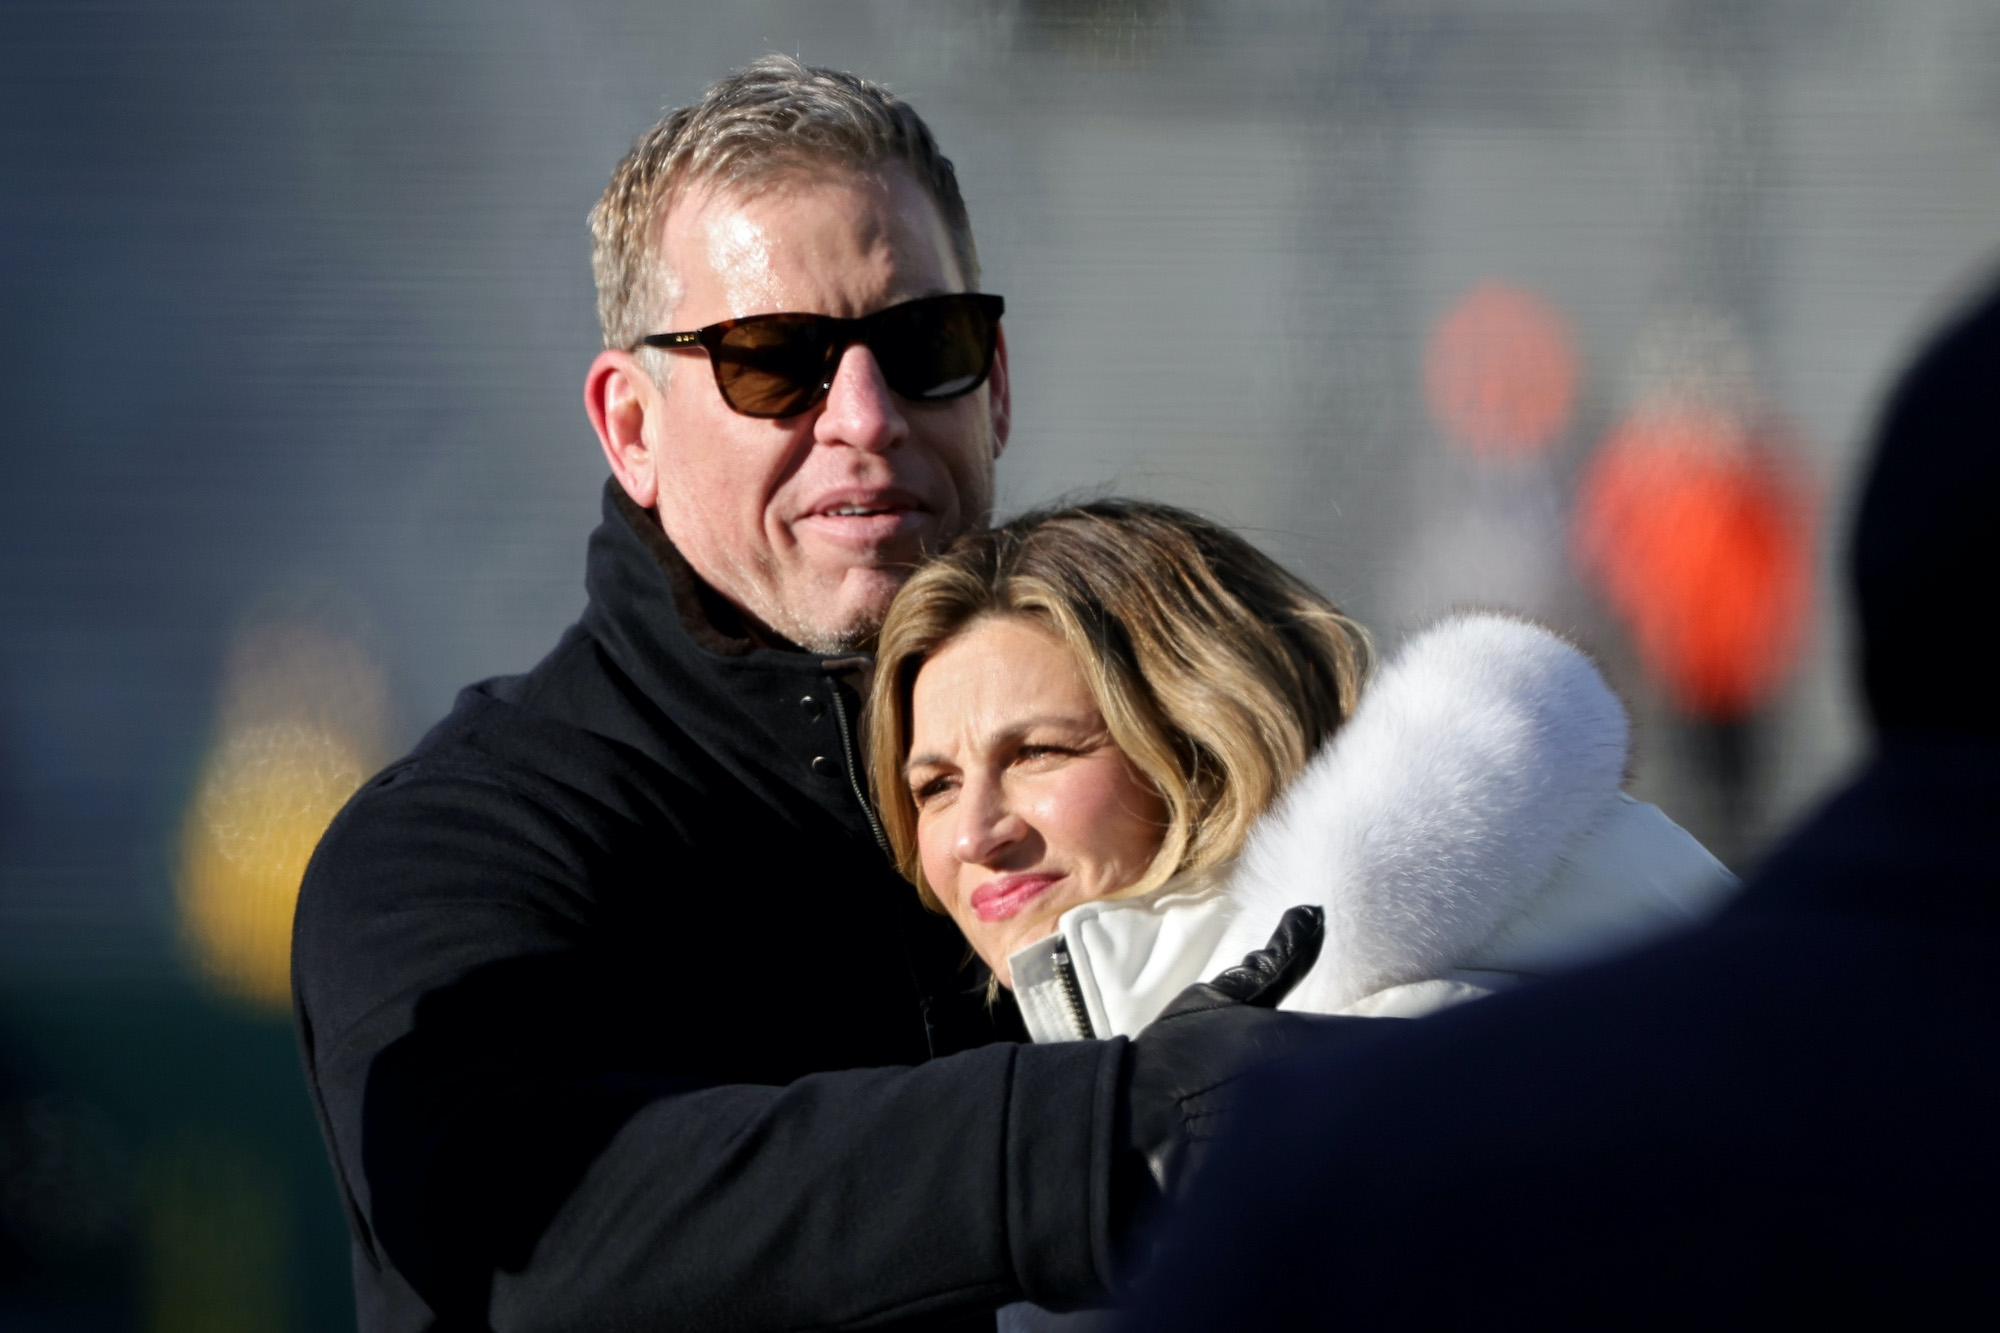 Troy Aikman and Erin Andrews meet on field